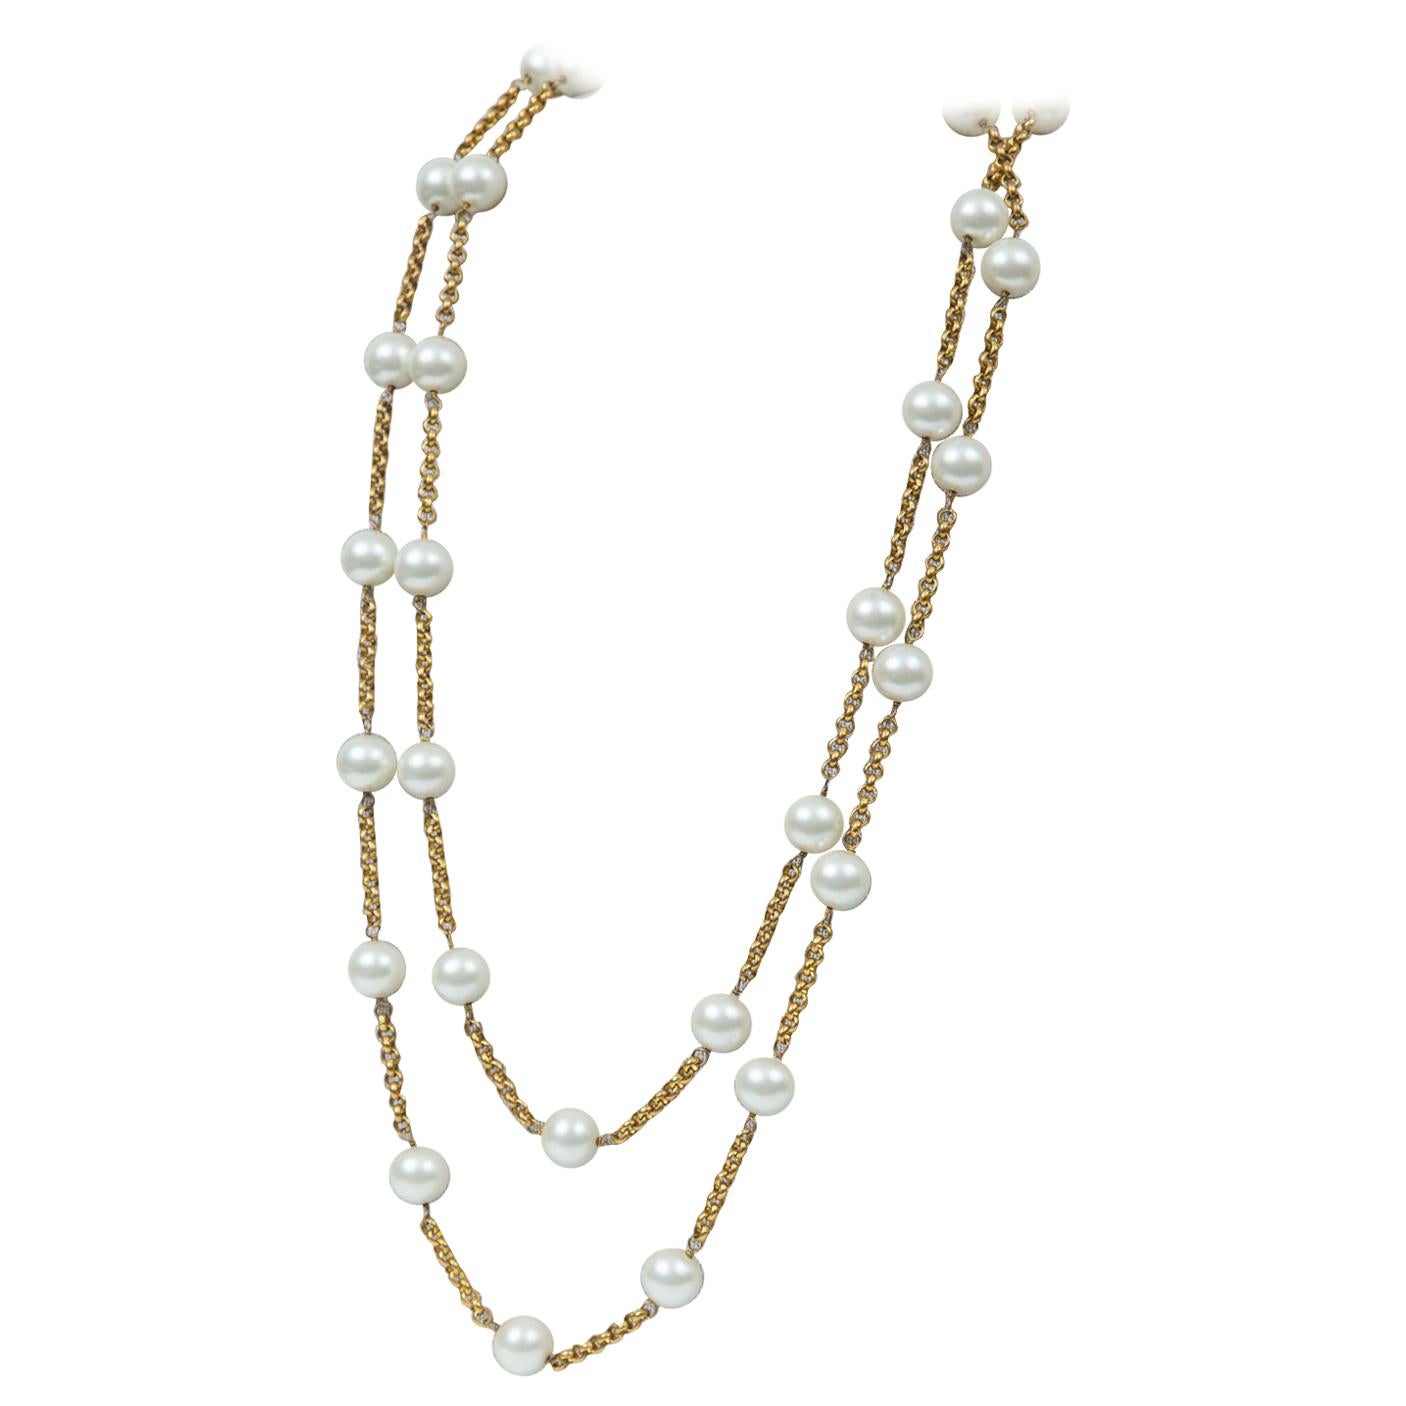 Chanel Long Gold and Pearl Necklace